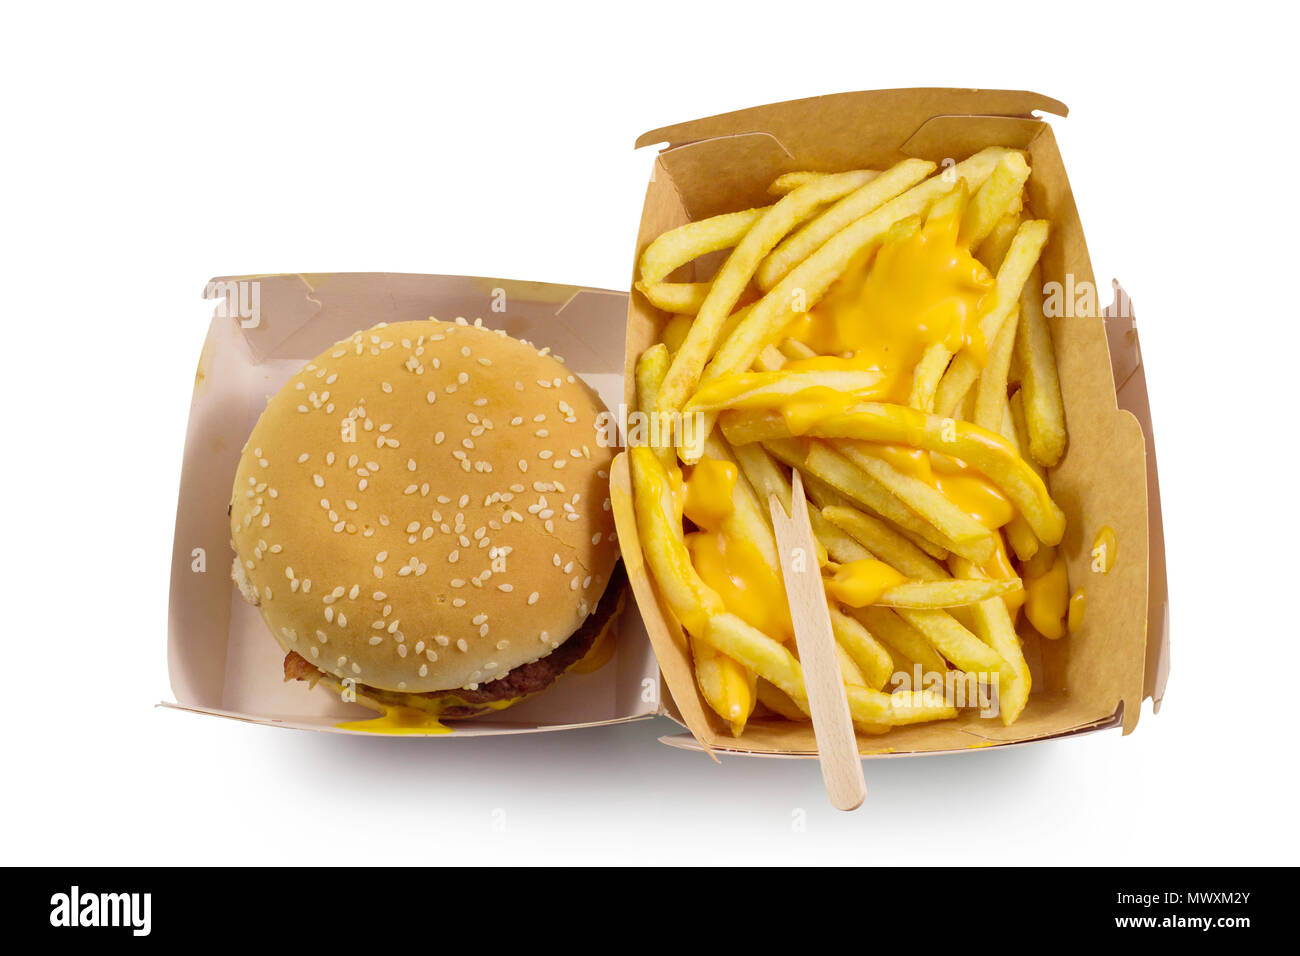 Tasty burger and french fries with yellow cheese, fast food and unhealthy eating concept, fast food snacks isolated in white background top view with  Stock Photo